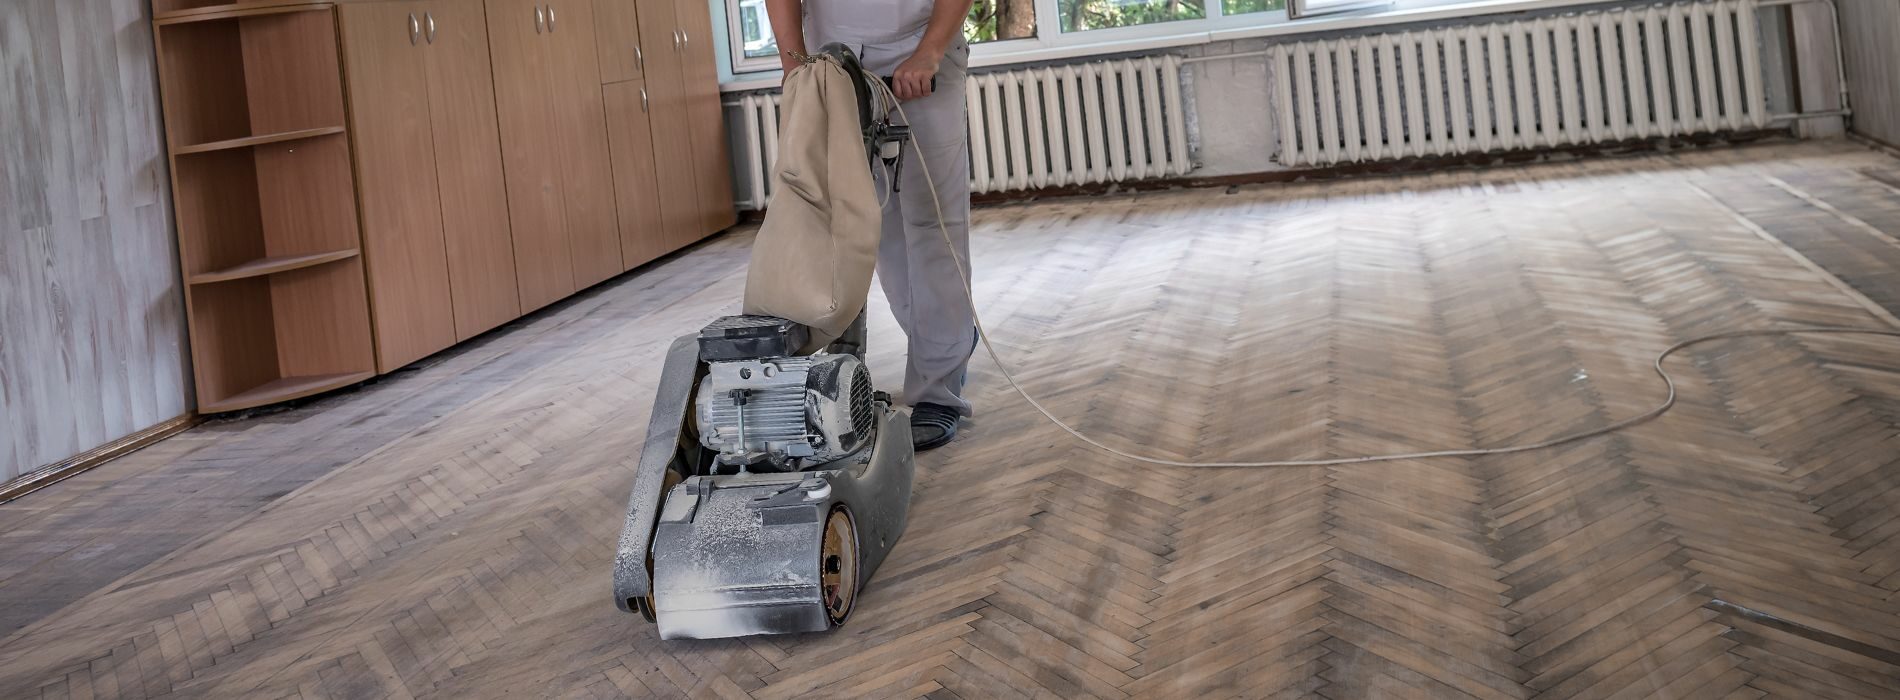 Experience professional herringbone floor sanding by Mr Sander® in Highbury, N5 with the powerful Bona Belt Lite. This high-performance sander operates at 2.2 kW, 230 V, and 50 Hz, ensuring efficient and effective sanding. With its measurement of 200x750 mm, it offers excellent coverage and precision for impeccable results.